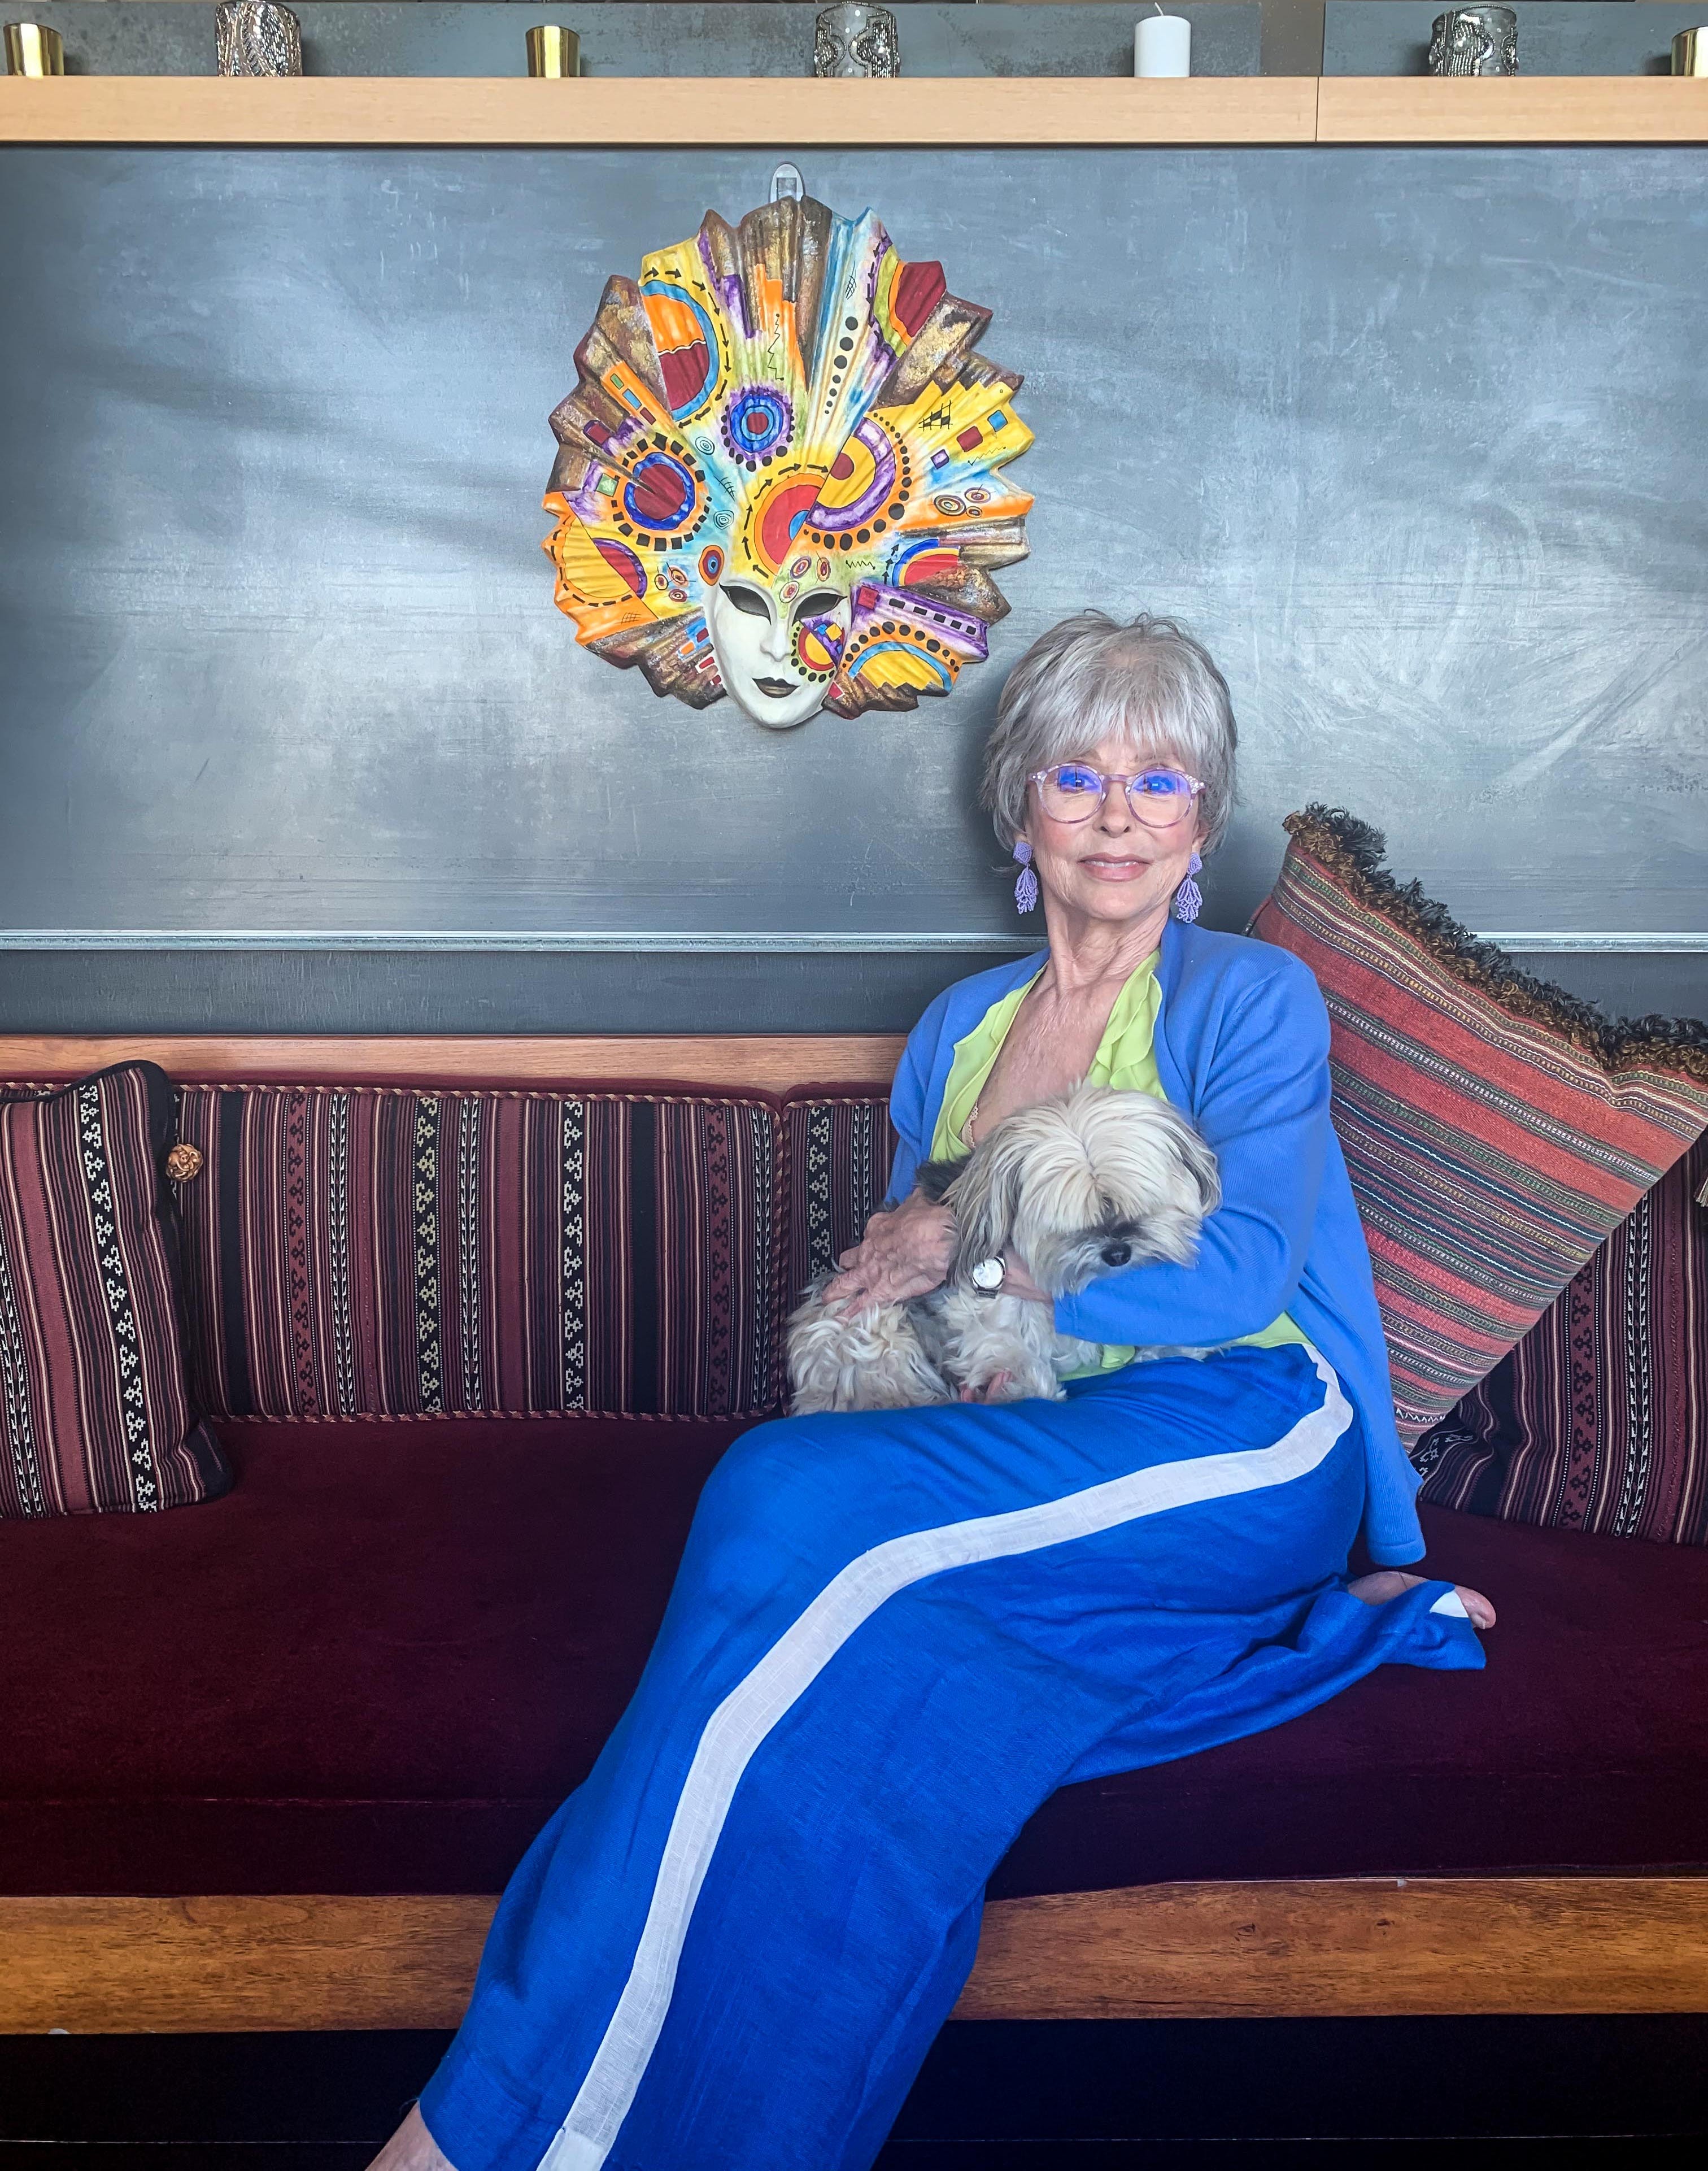 Rita Moreno poses for a portrait in her home in Berkeley, Calif., on July 27, 2020. Moreno was born in Puerto Rico and brought to New York as a child. She said being the only Spanish speaker in her kindergarten class was frightening, but she made the decision to be brave. It's a decision she's continued to make during her 70-year career.